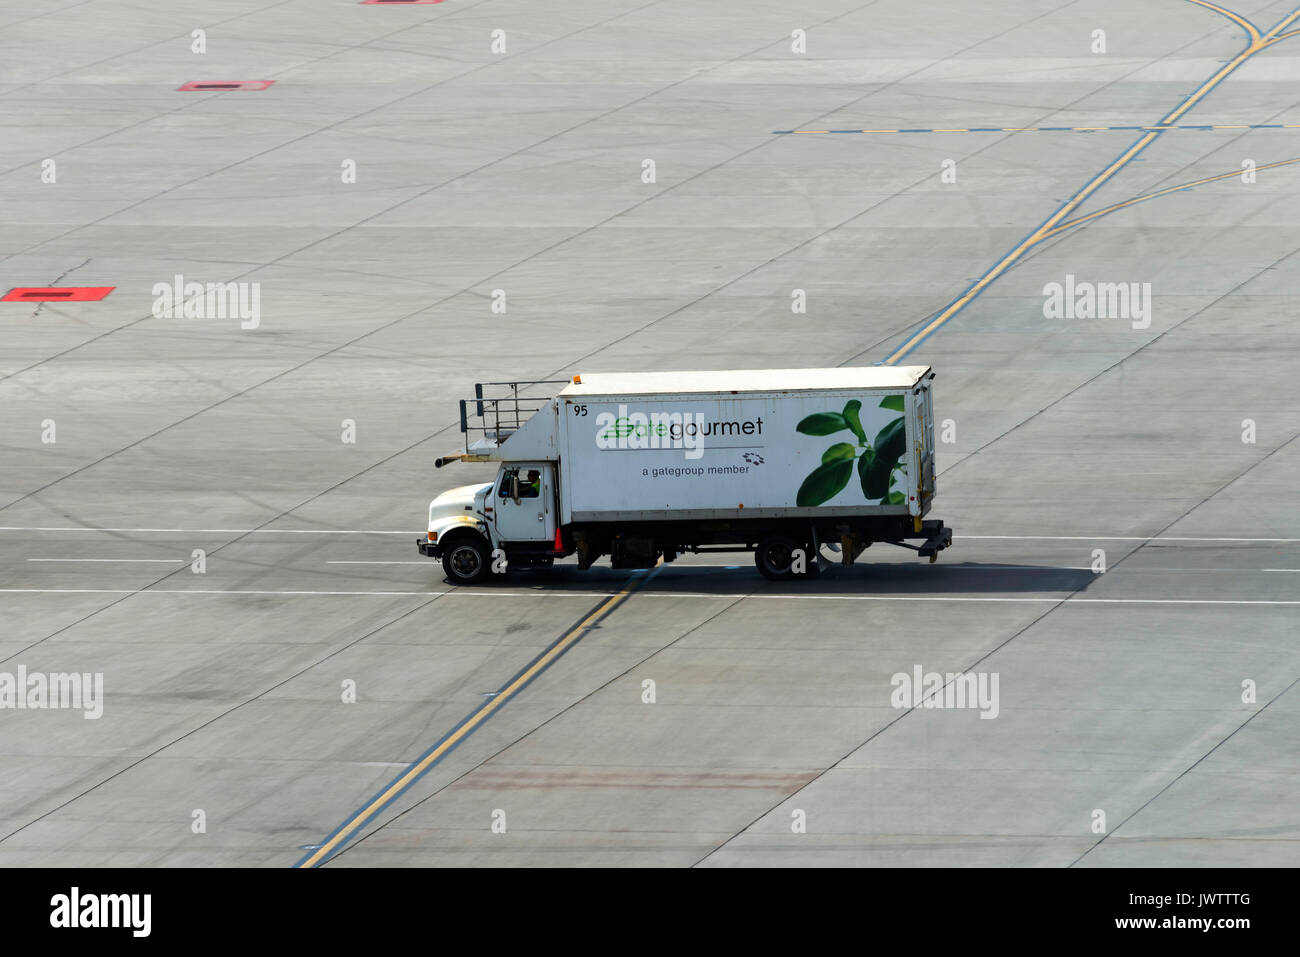 A Gate Gourmet Catering Truck About to Replenish an Aircraft with Food and Drinks on the Taxiway at Calgary International Airport Alberta Canada Stock Photo